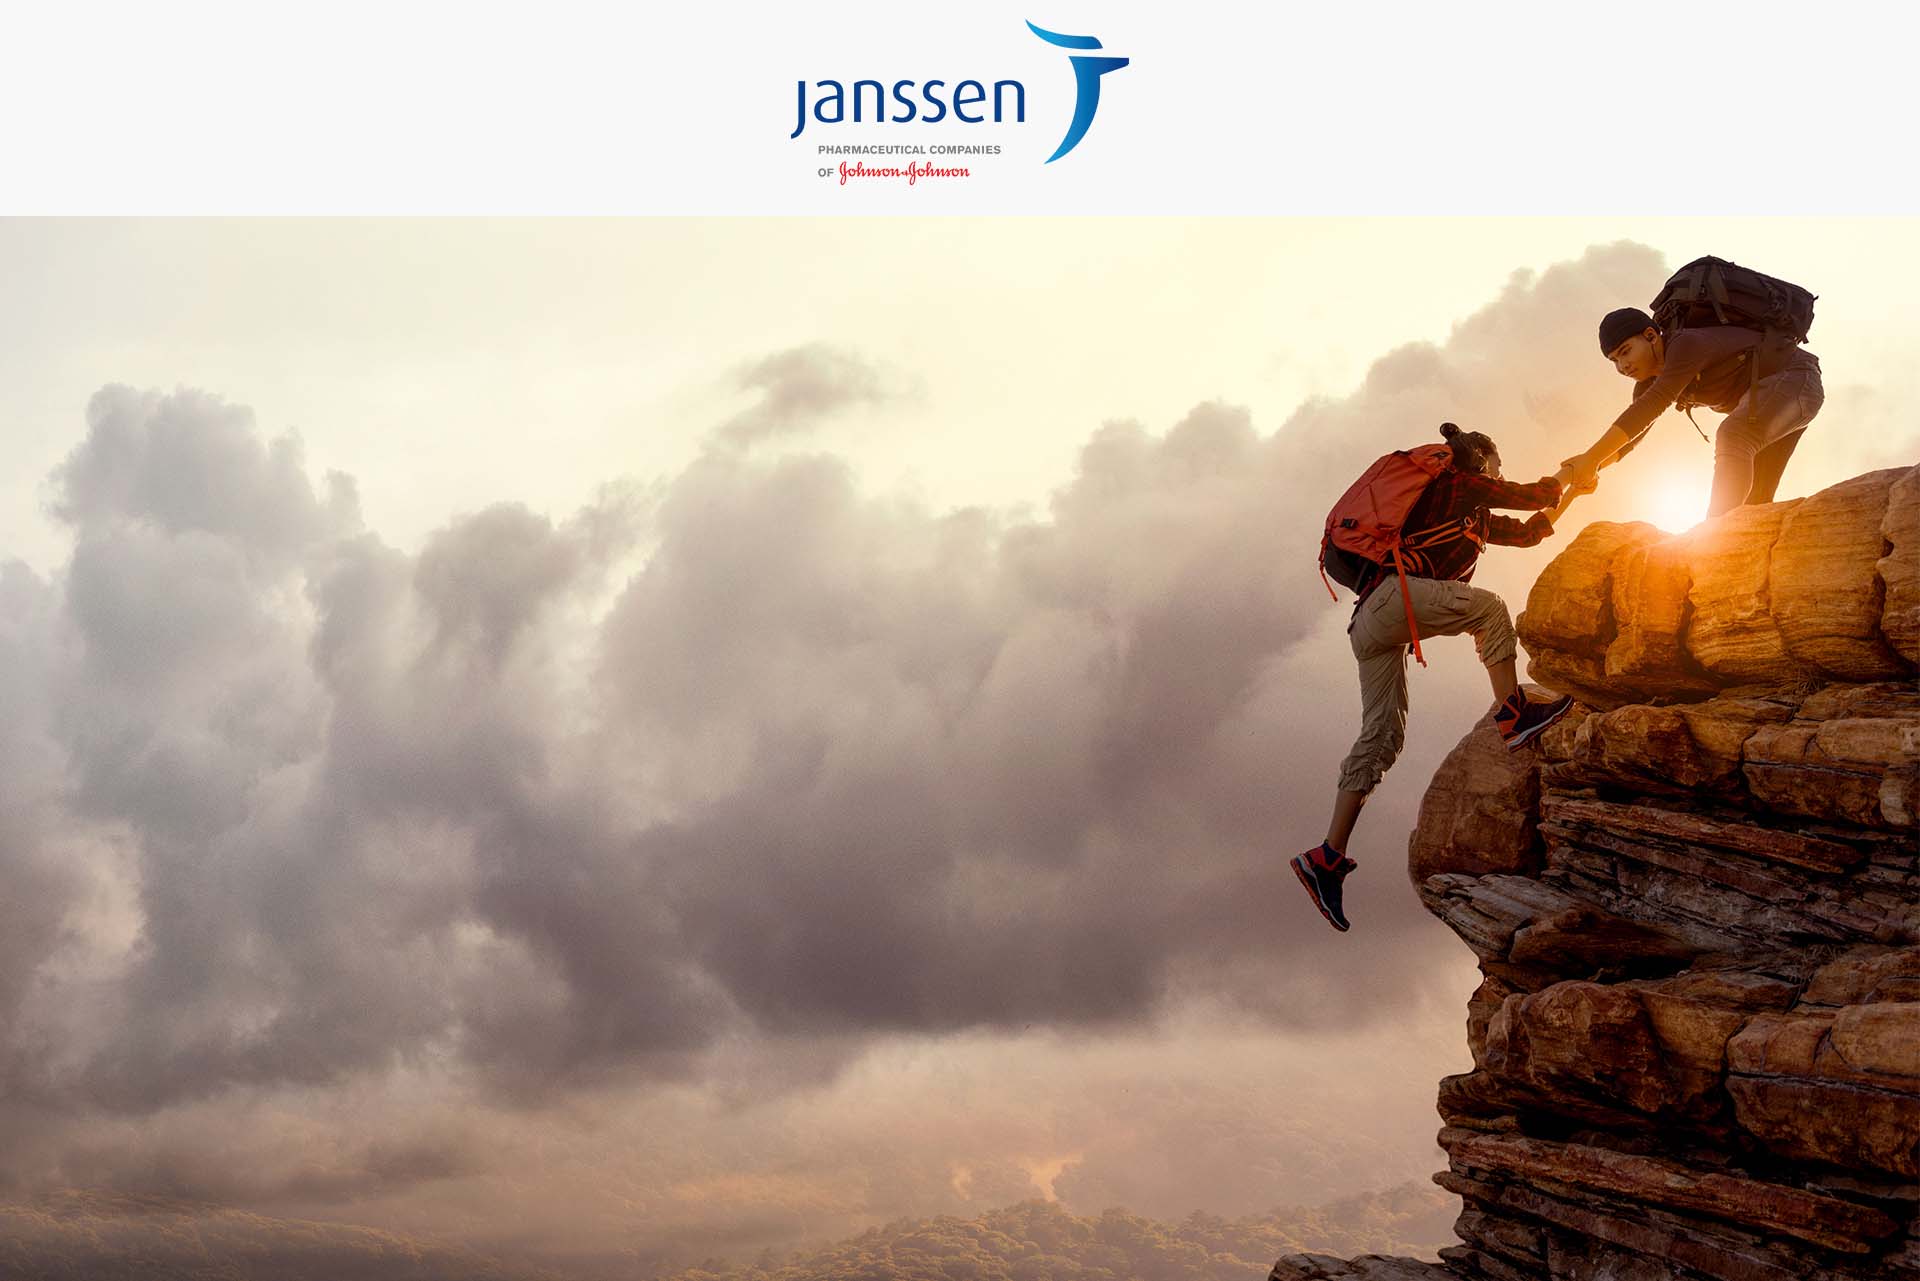 Janssen logo and picture of people helping each other up a cliff